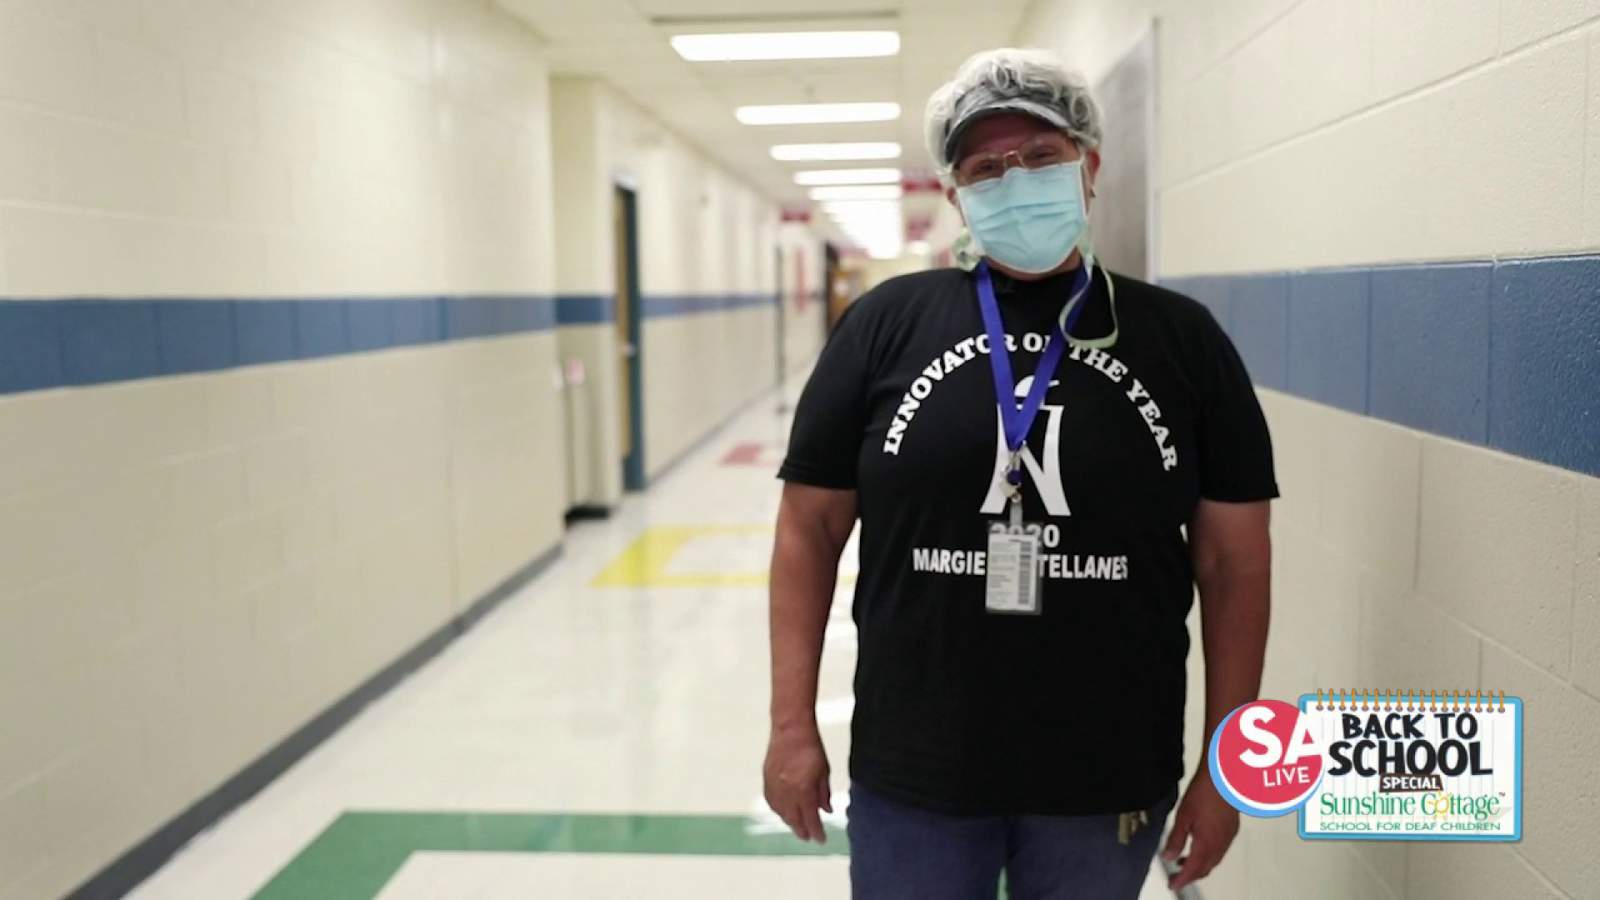 Custodian spreads kindness with signs, donations + positivity